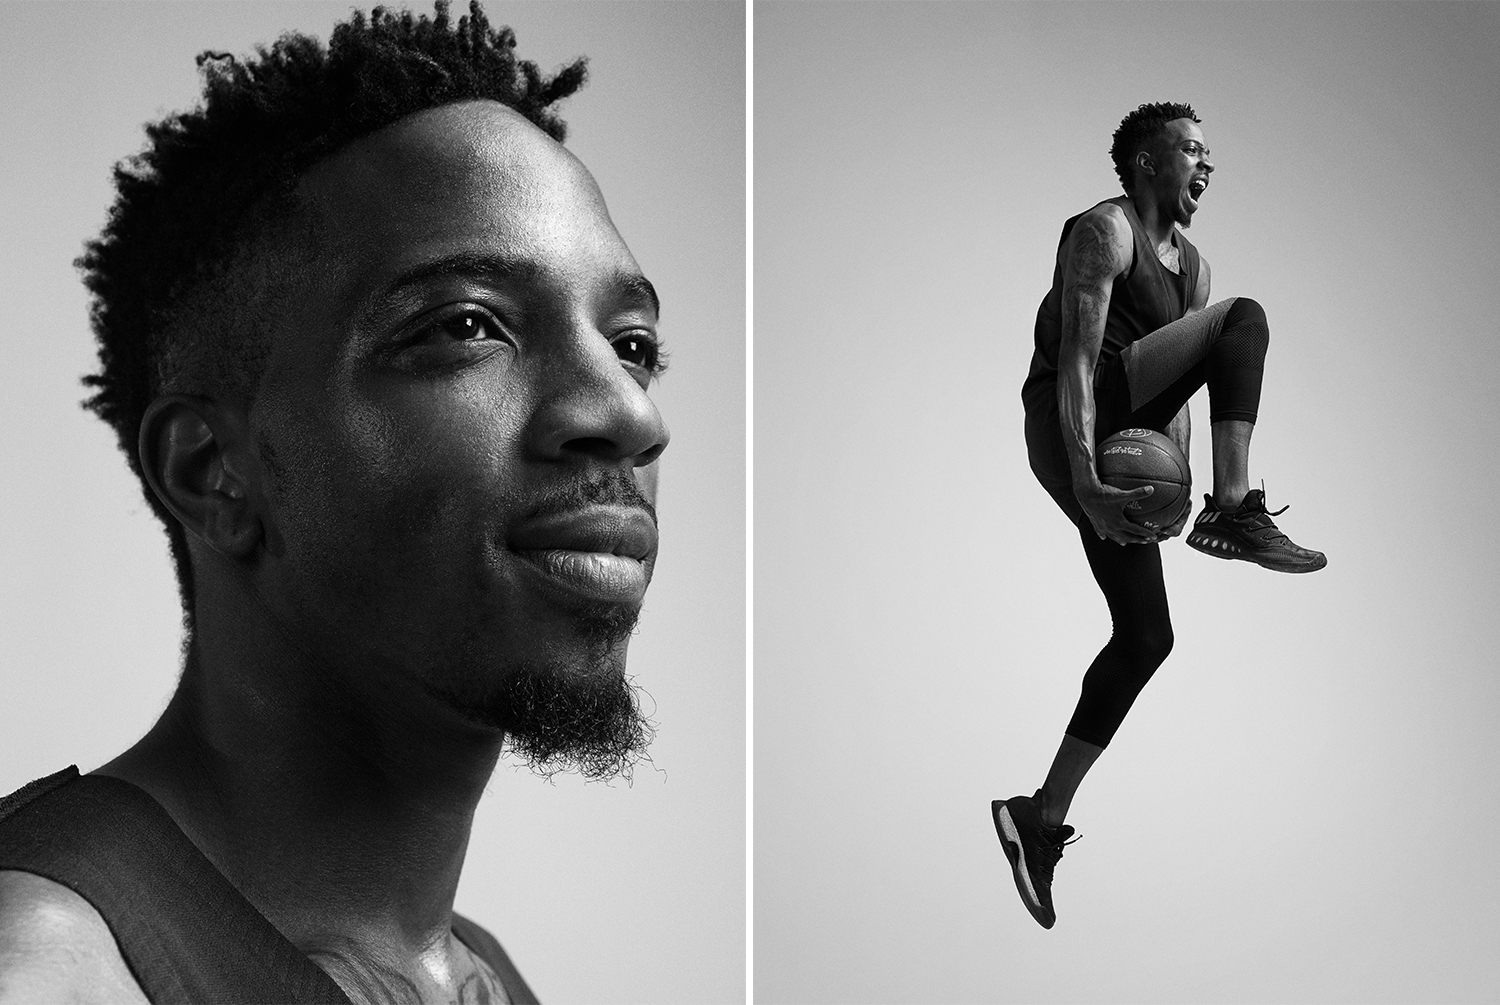 A portrait and an action shot of a Veniceball League player with in an Adidas outfit photographed by Maximilian Baier